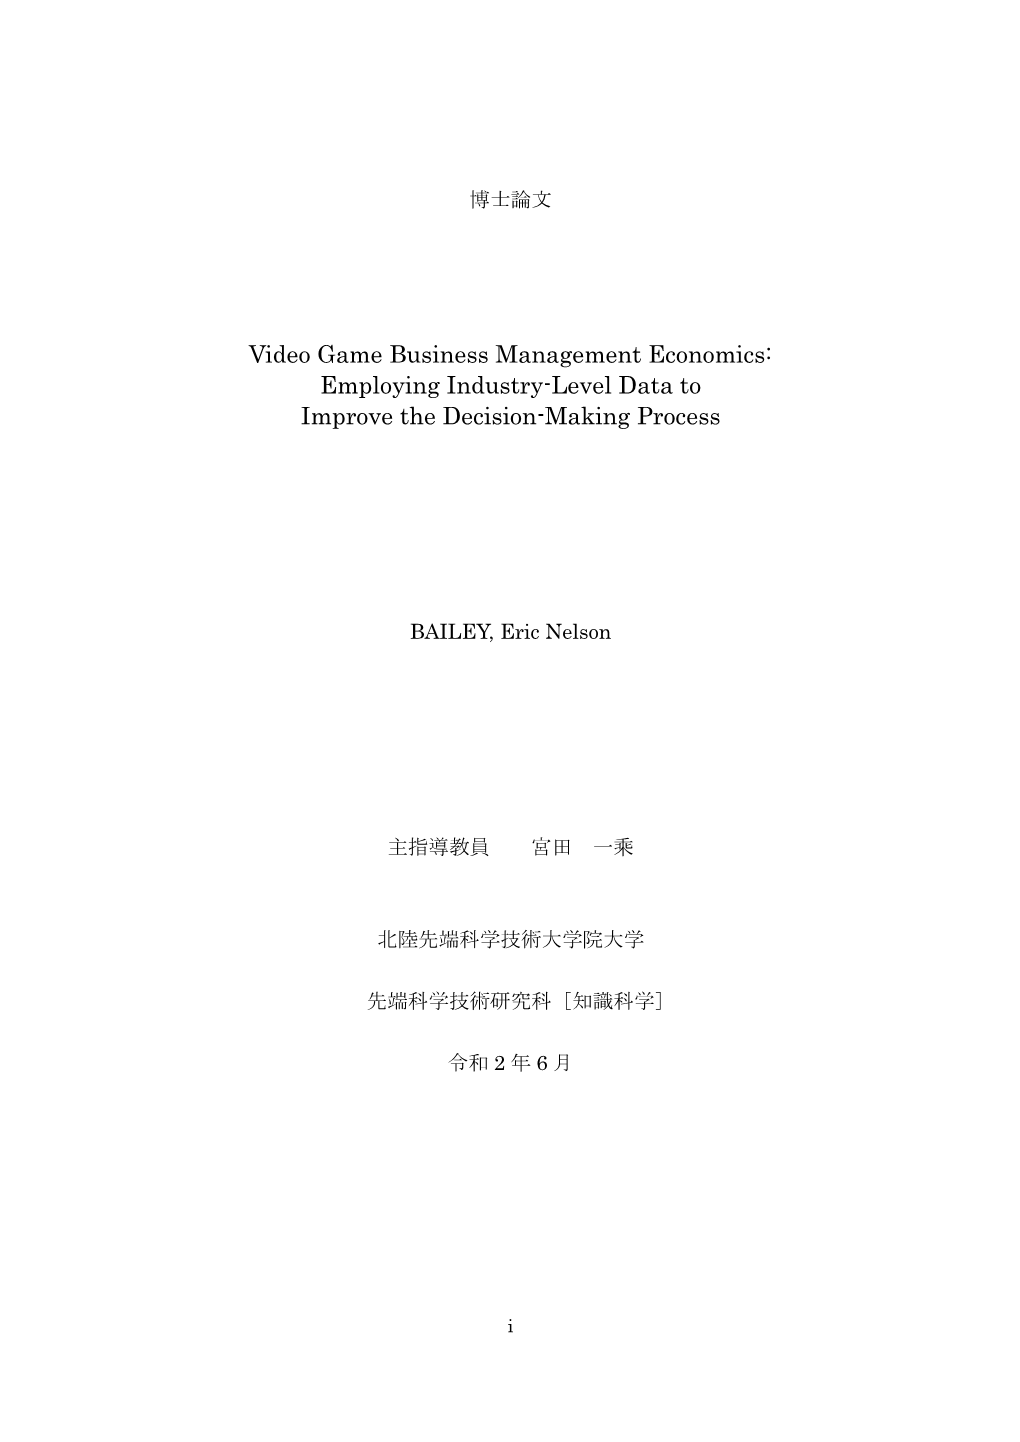 Video Game Business Management Economics: Employing Industry-Level Data to Improve the Decision-Making Process